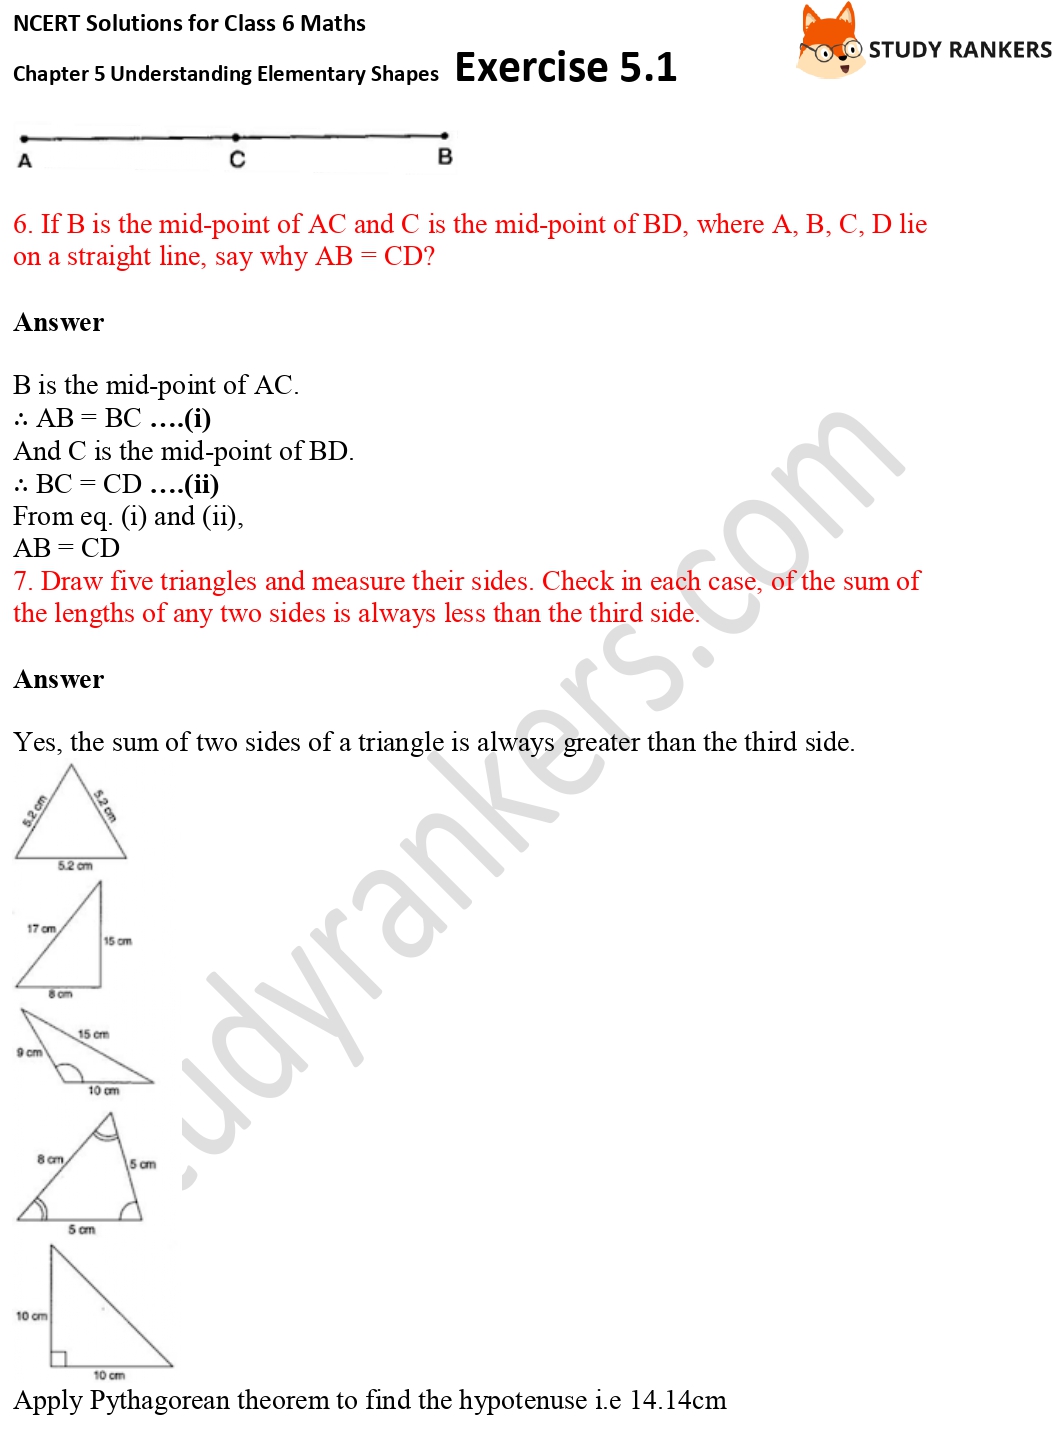 NCERT Solutions for Class 6 Maths Chapter 5 Understanding Elementary Shapes Exercise 5.1 Part 2